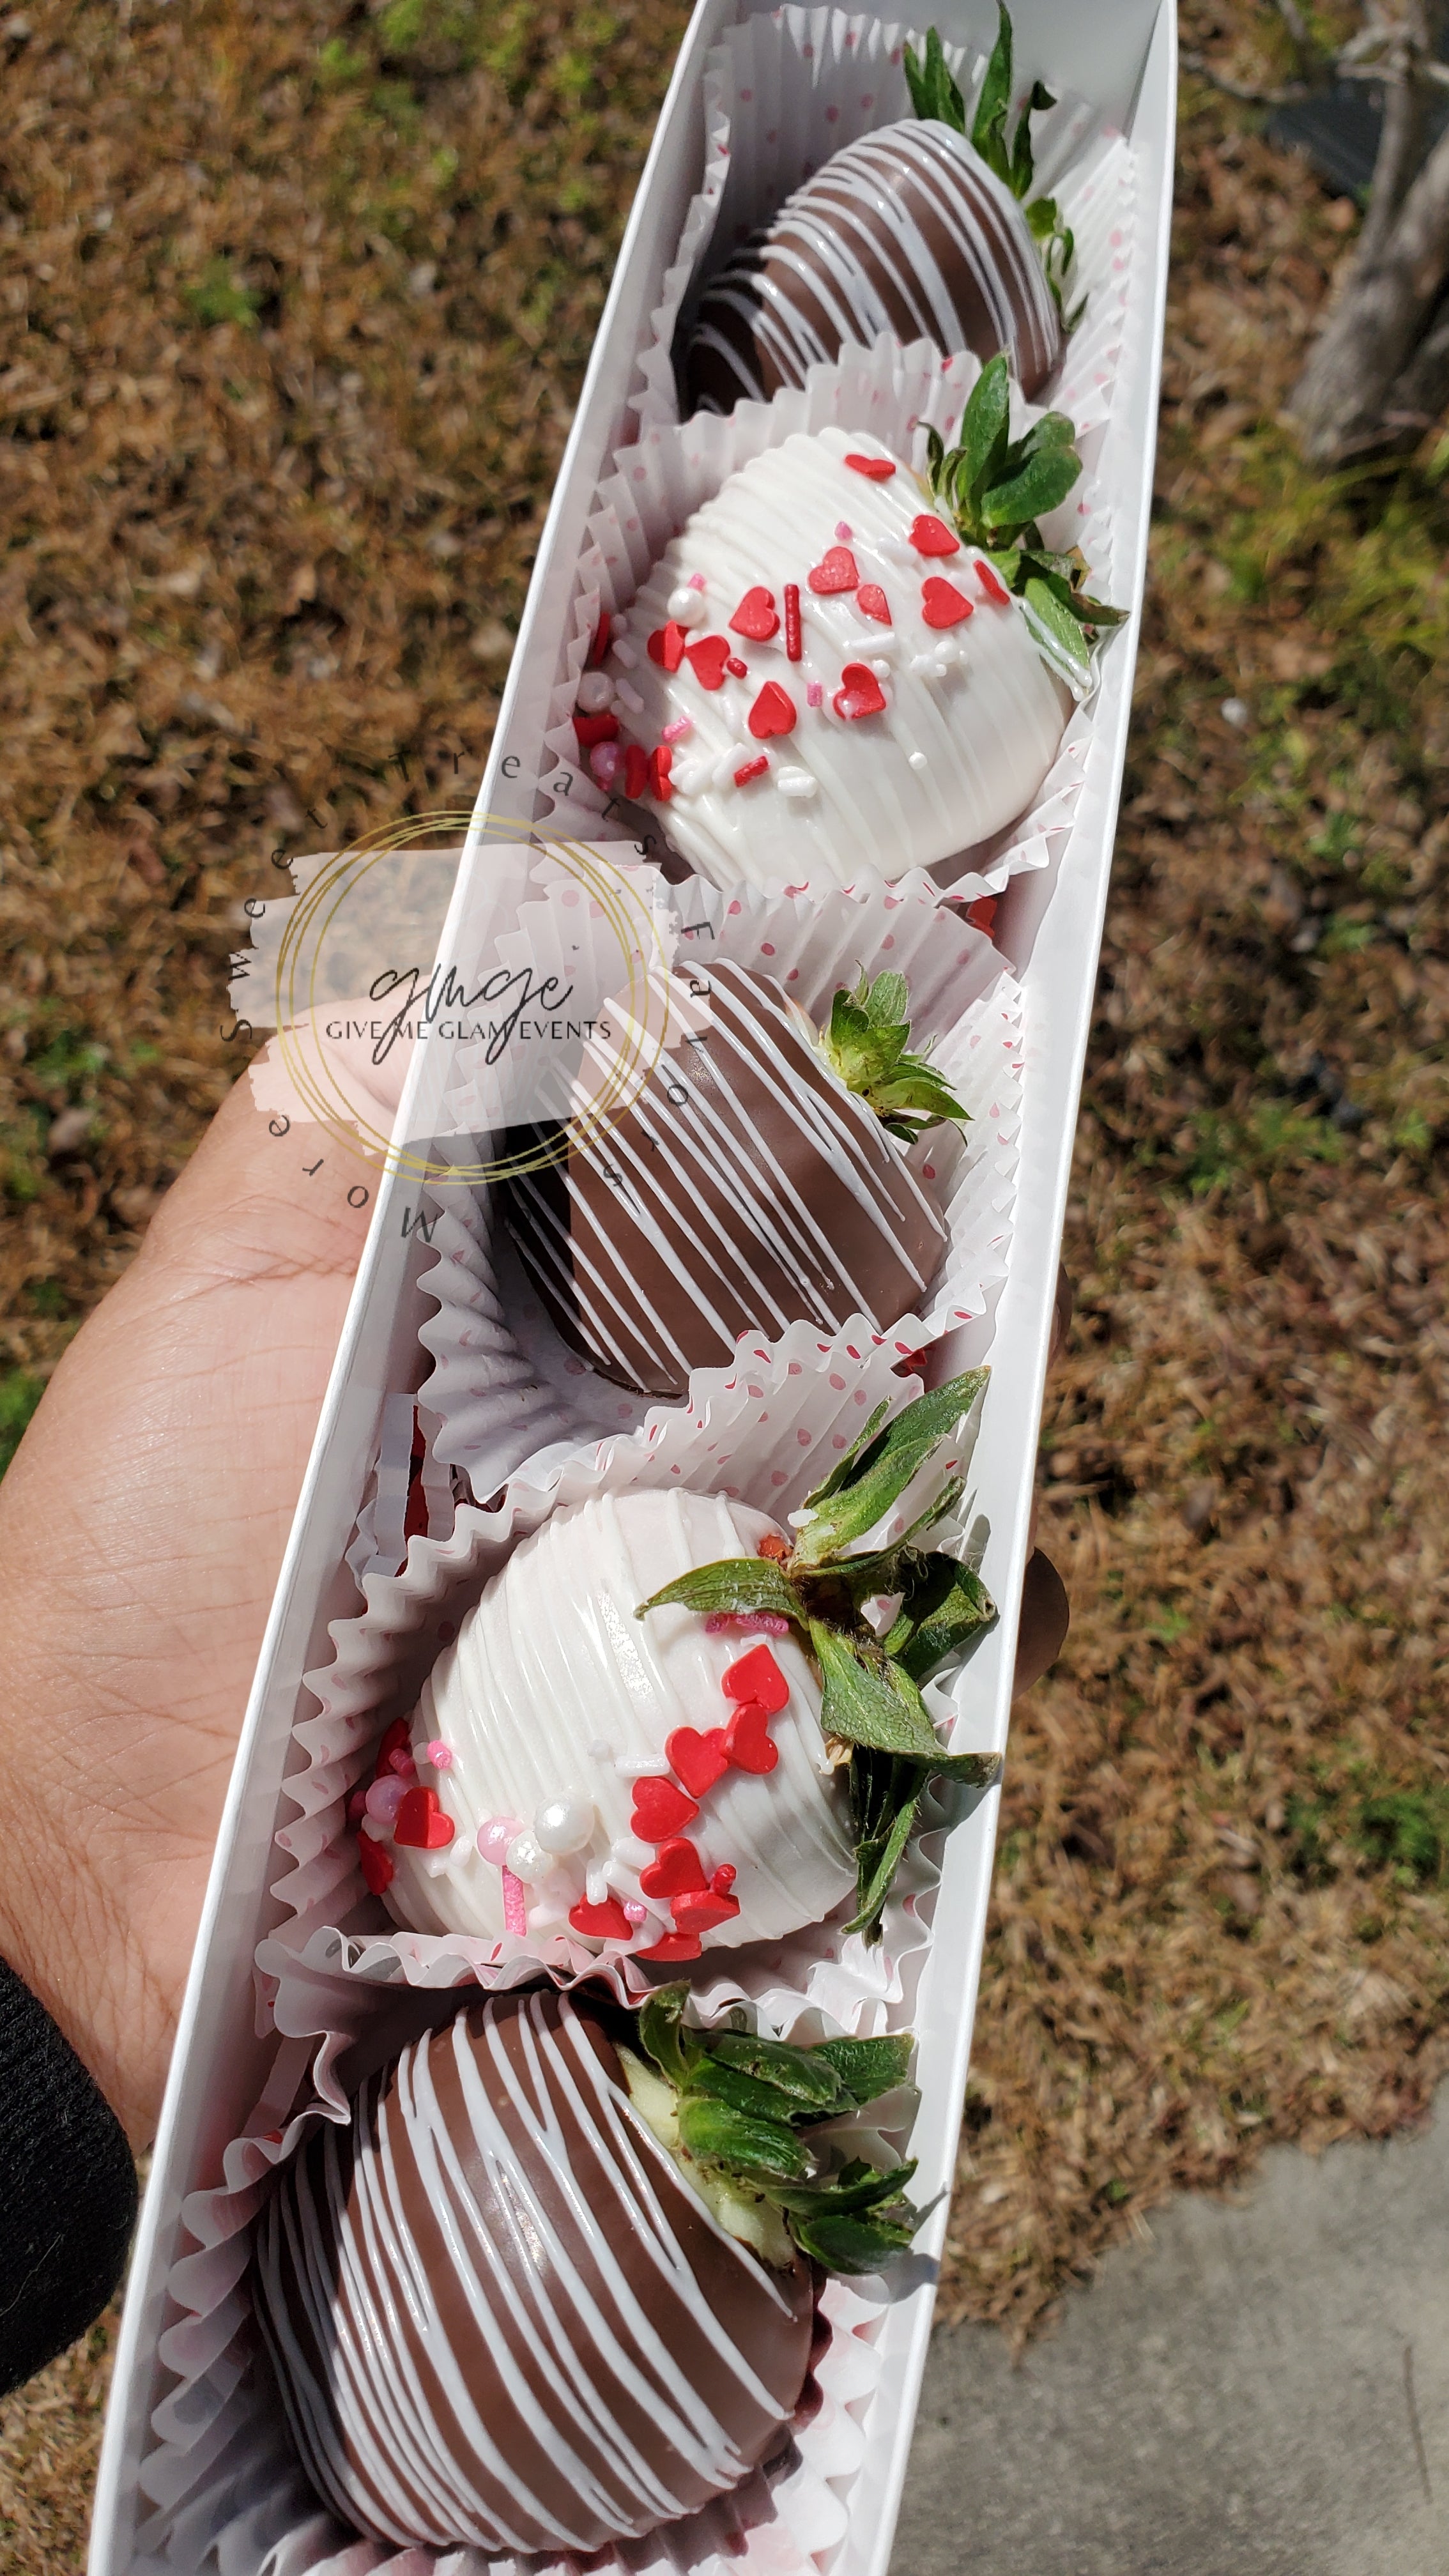 5ct Chocolate Covered Strawberry Boxes (LOCAL PICKUP ONLY)